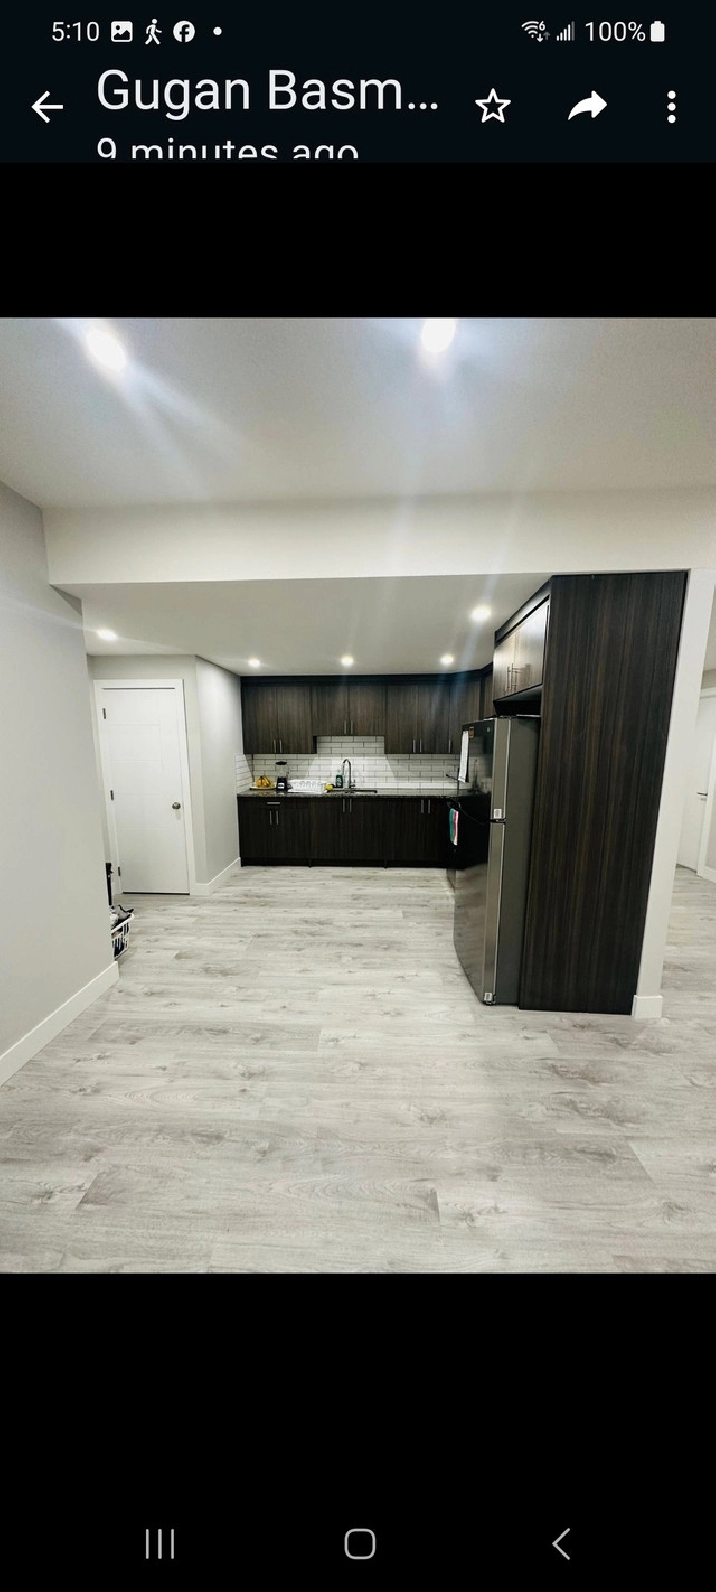 basment for rent in Calgary,AB - Apartments & Condos for Rent